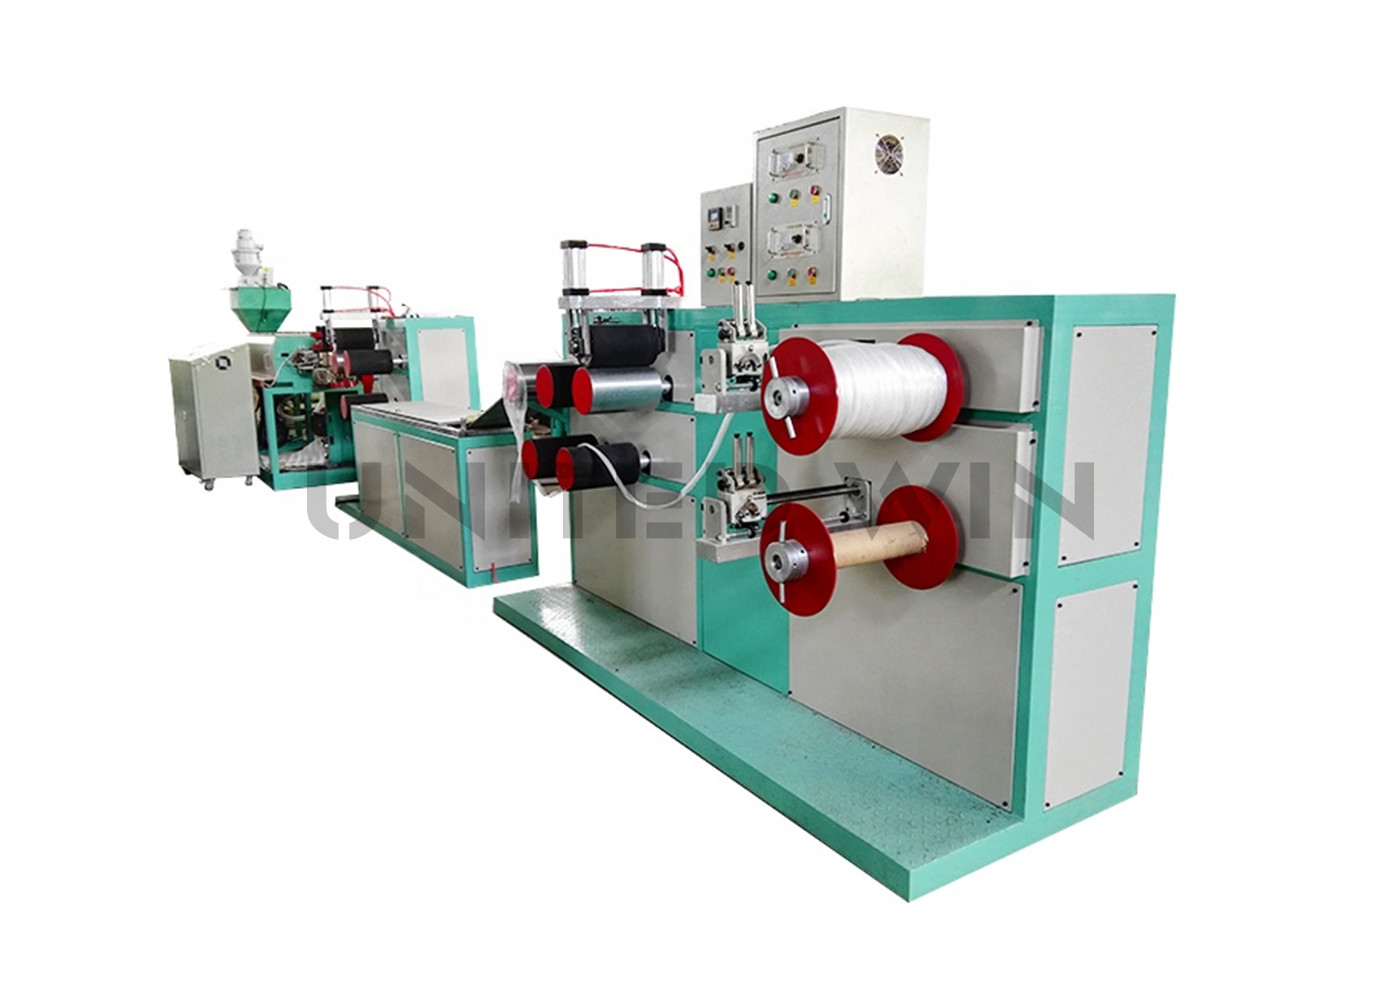 Plastic raw materials into a net continuous automatic production of no knot net equipment